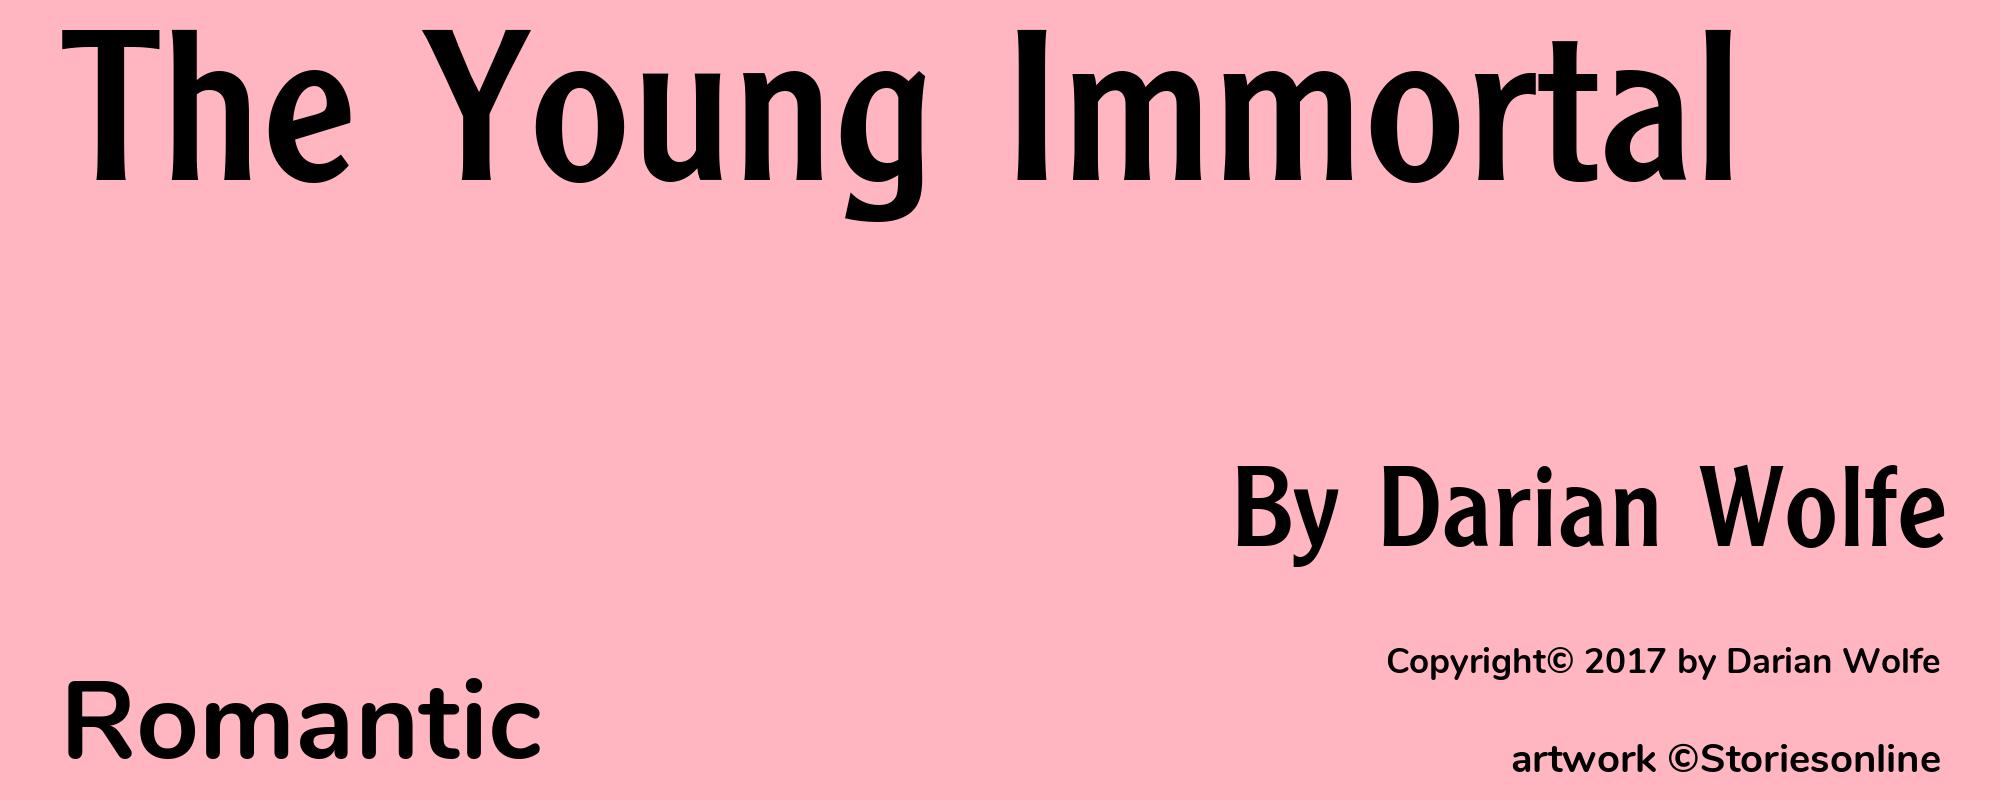 The Young Immortal - Cover